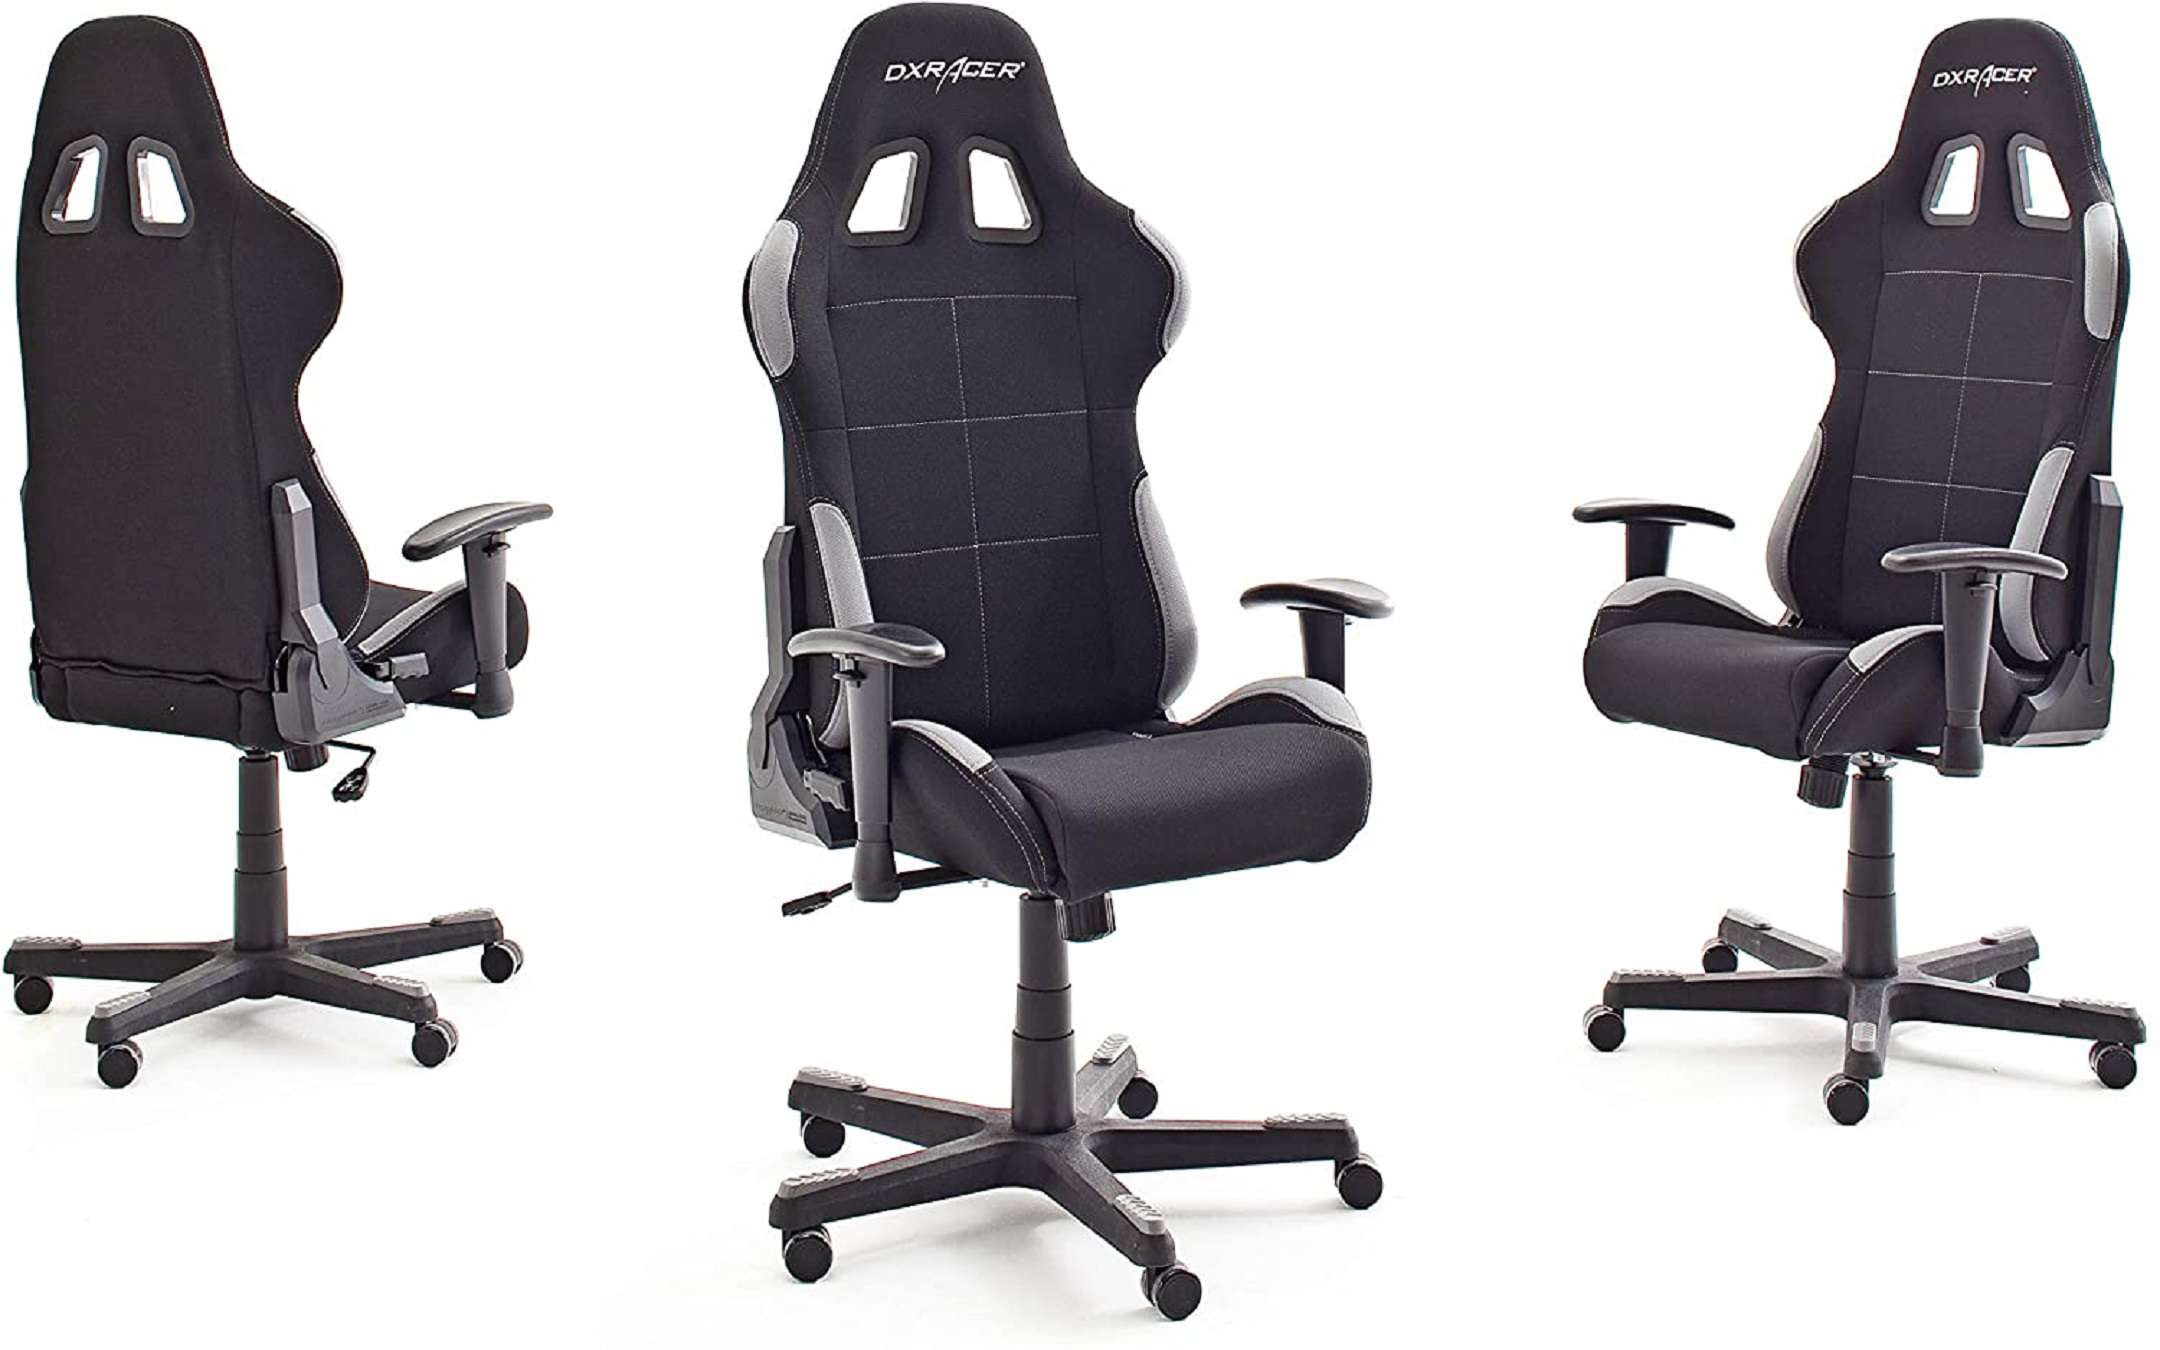 DX RACER 5 gaming chair at a price never seen before!